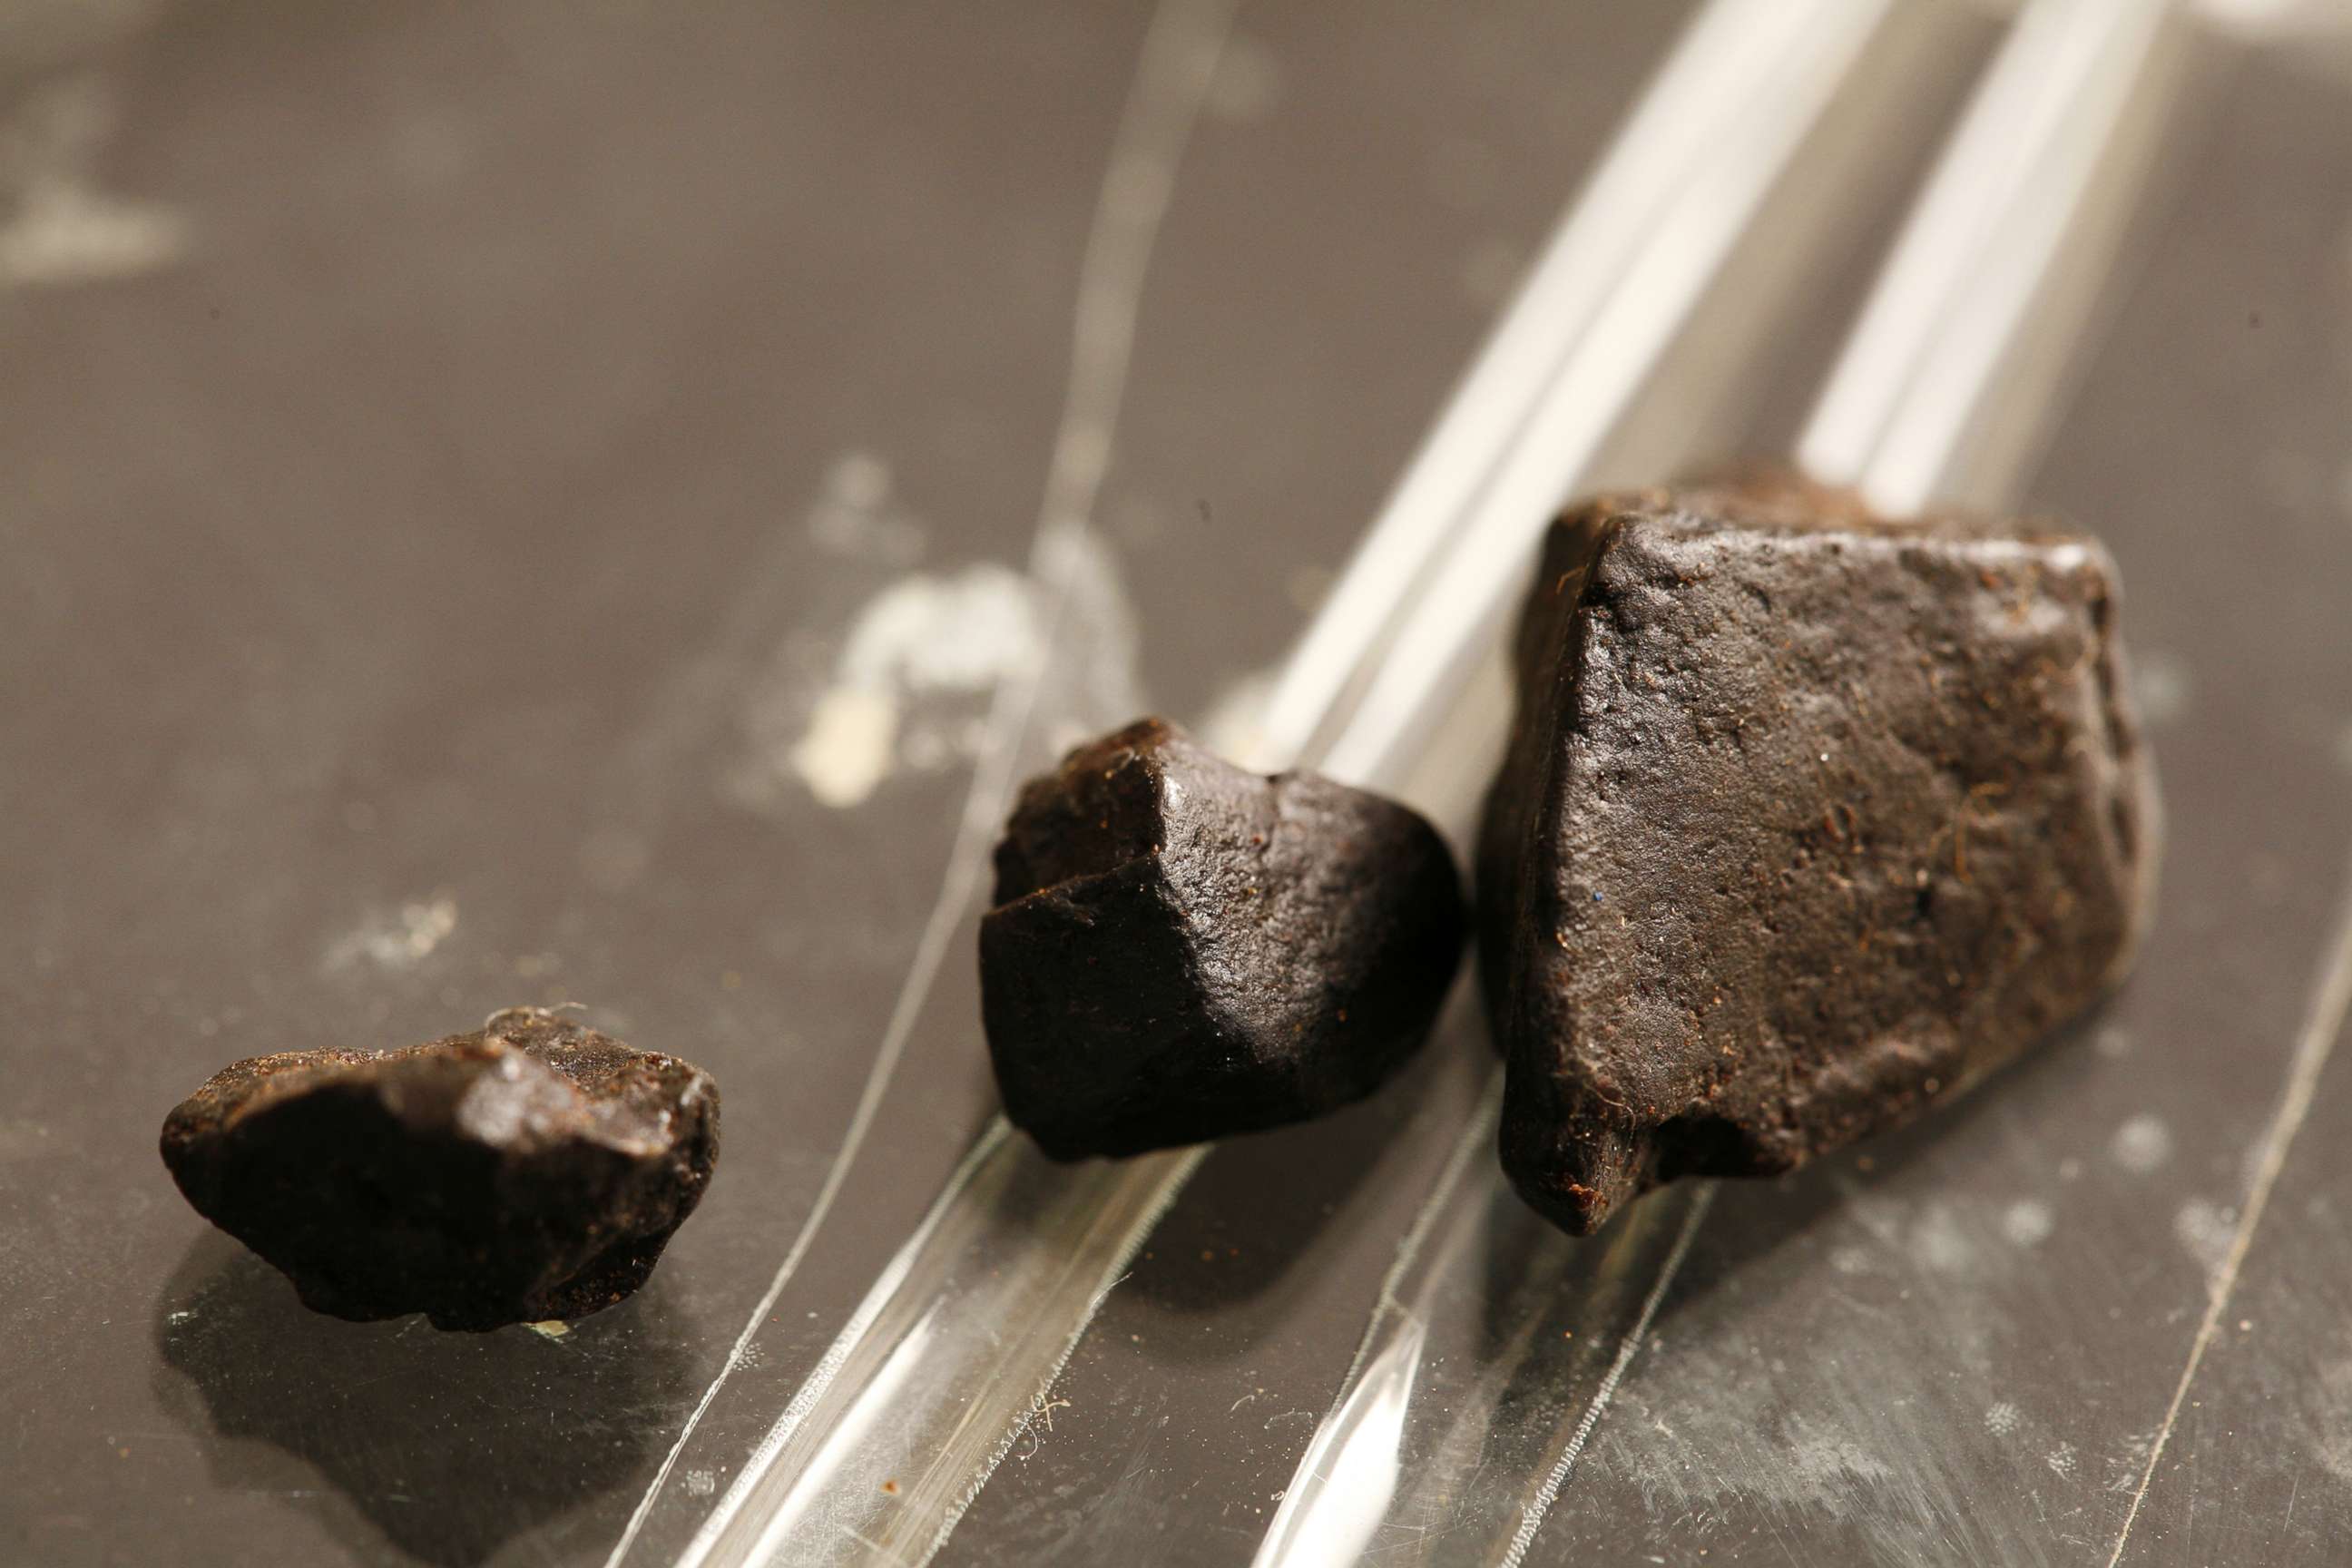 PHOTO: In this undated file photo, black tar heroin is shown.